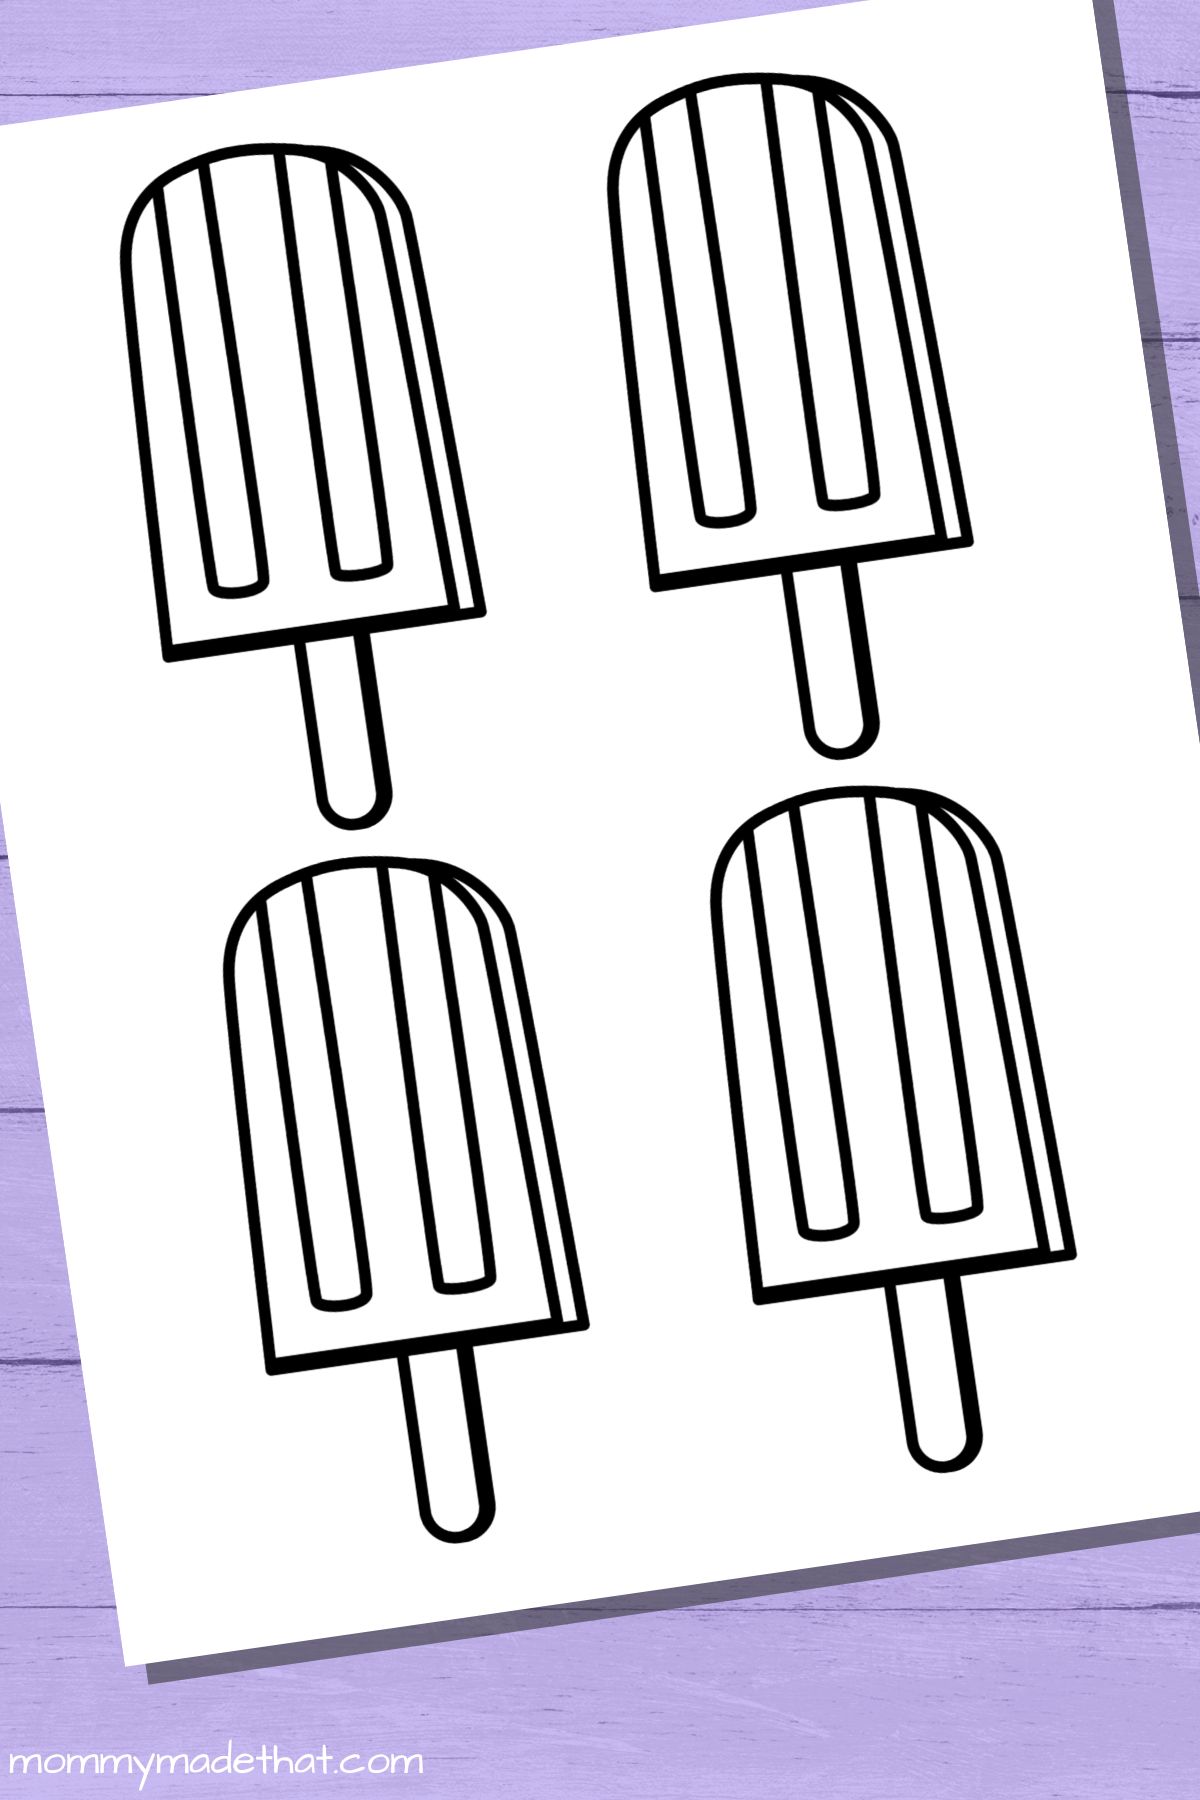 Free Printable Popsicle Templates (So many cute ones!)